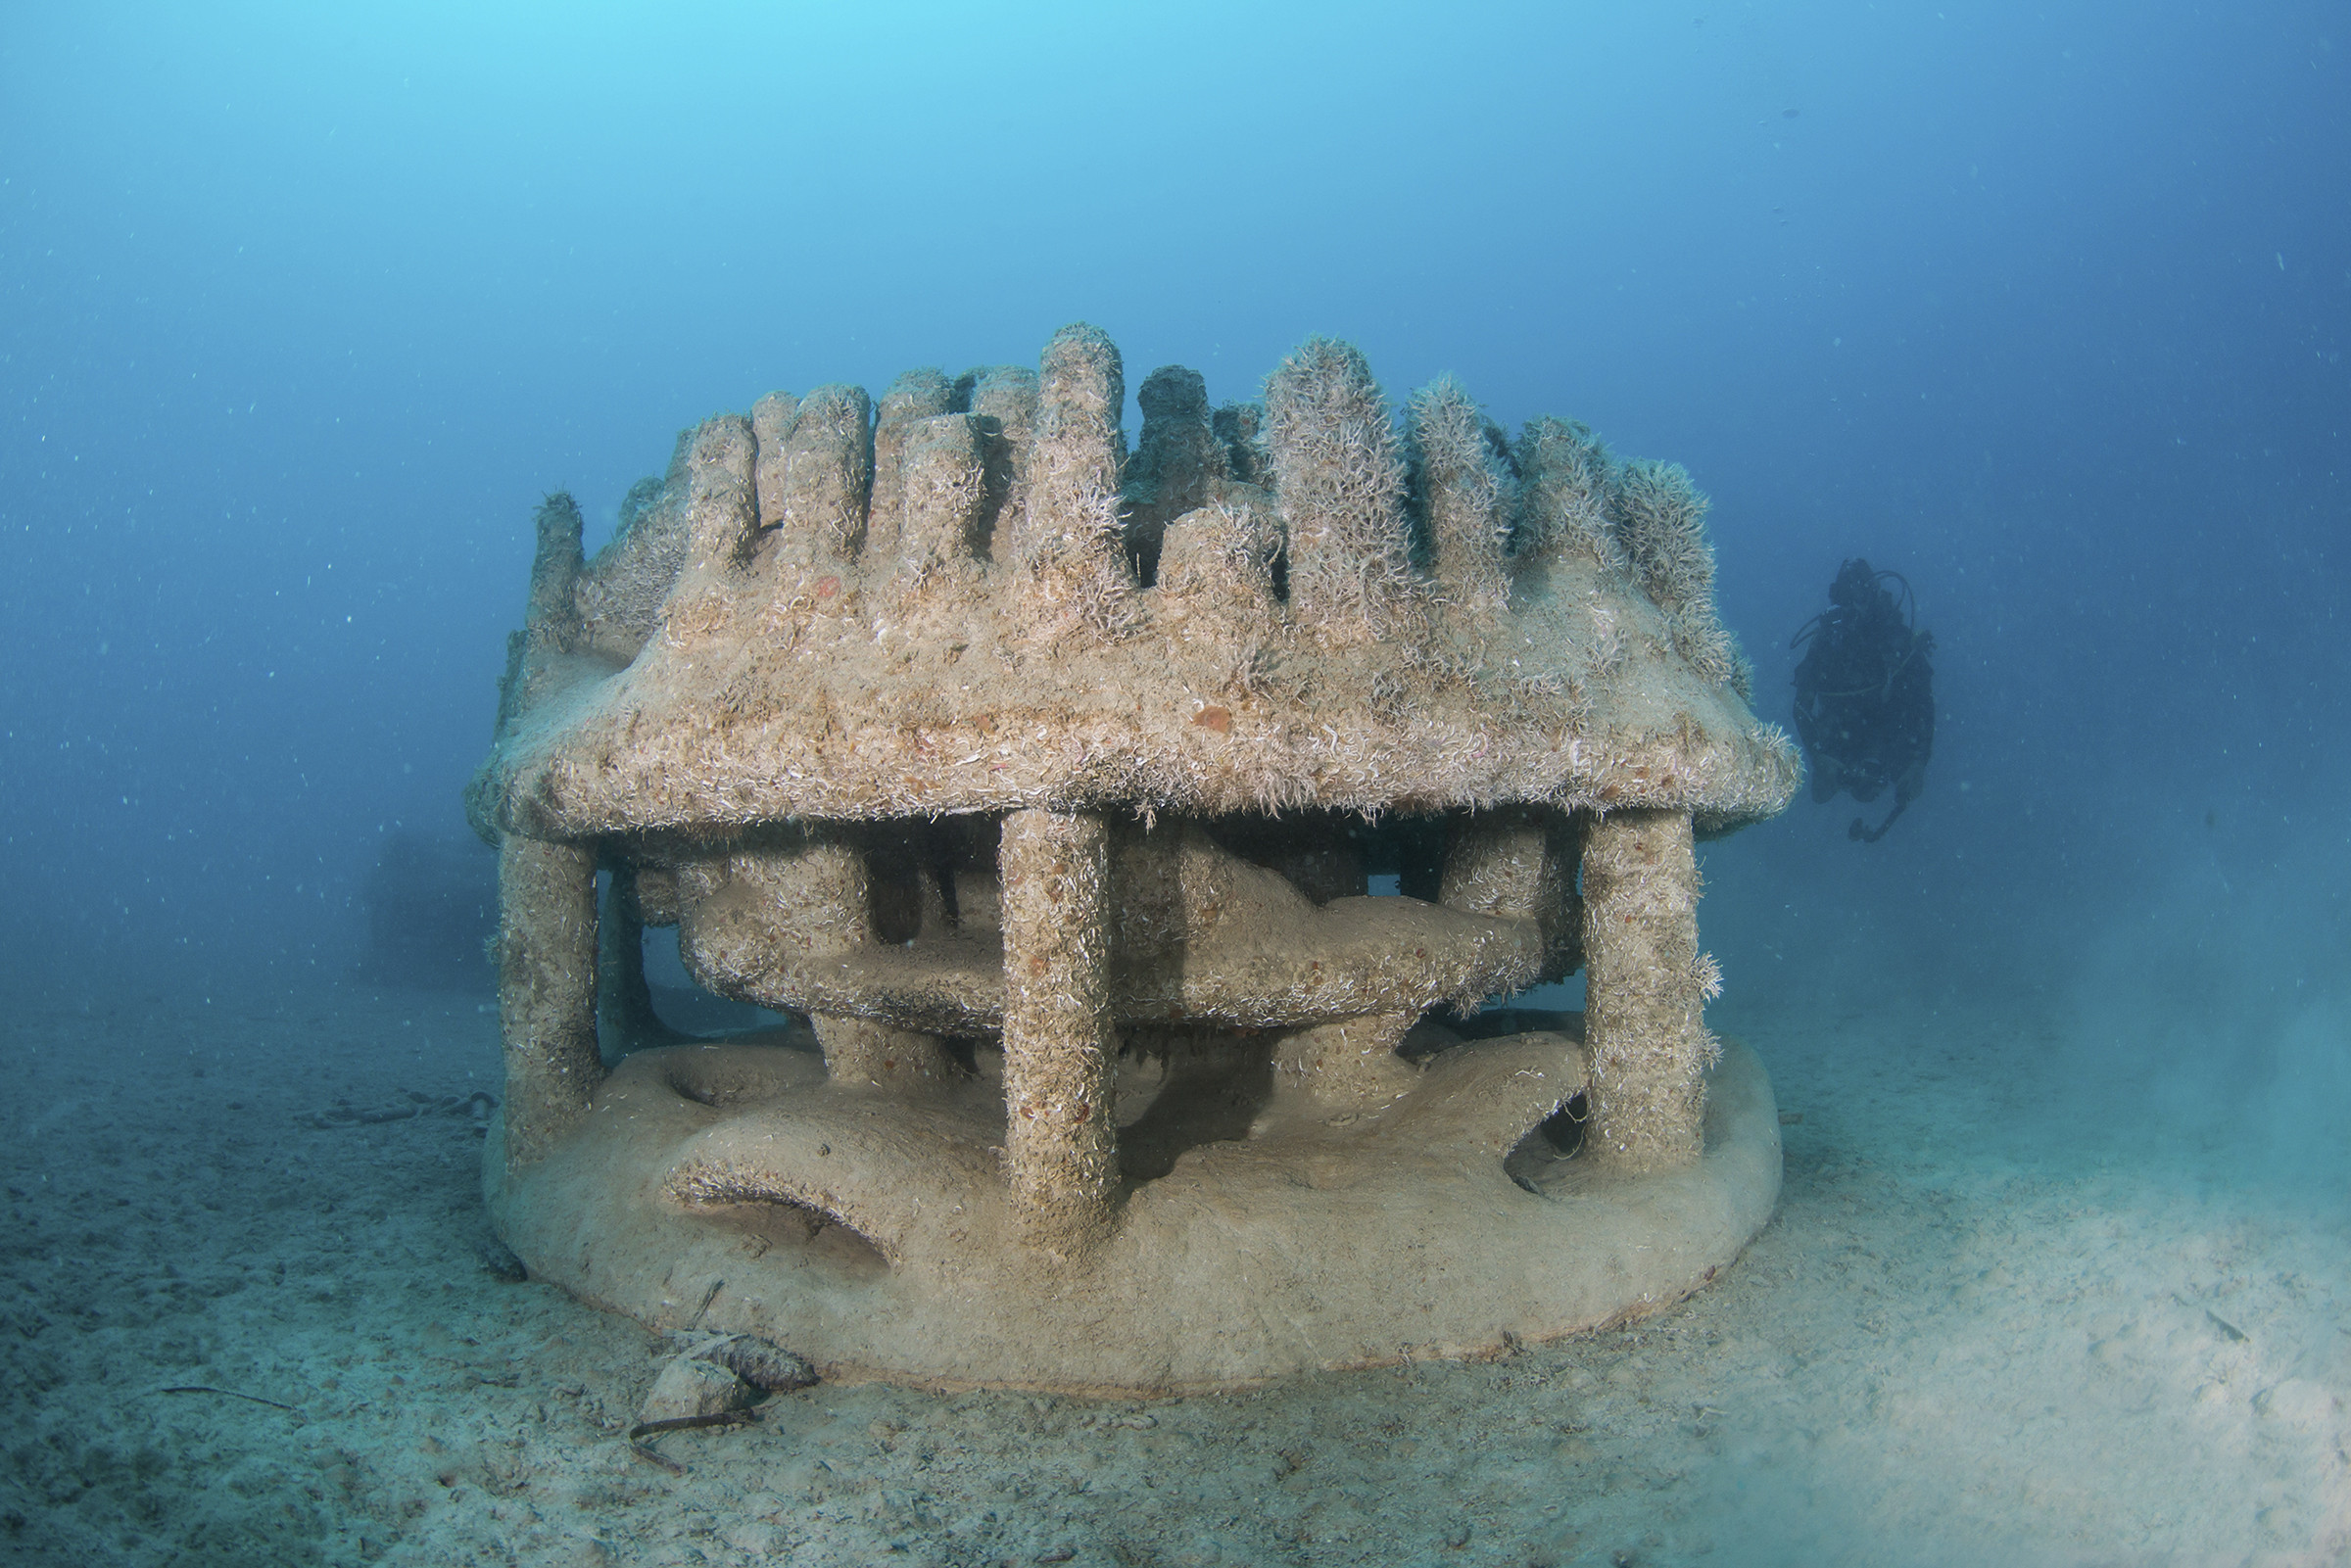 3D-printed reef on the seabed offshore Monaco